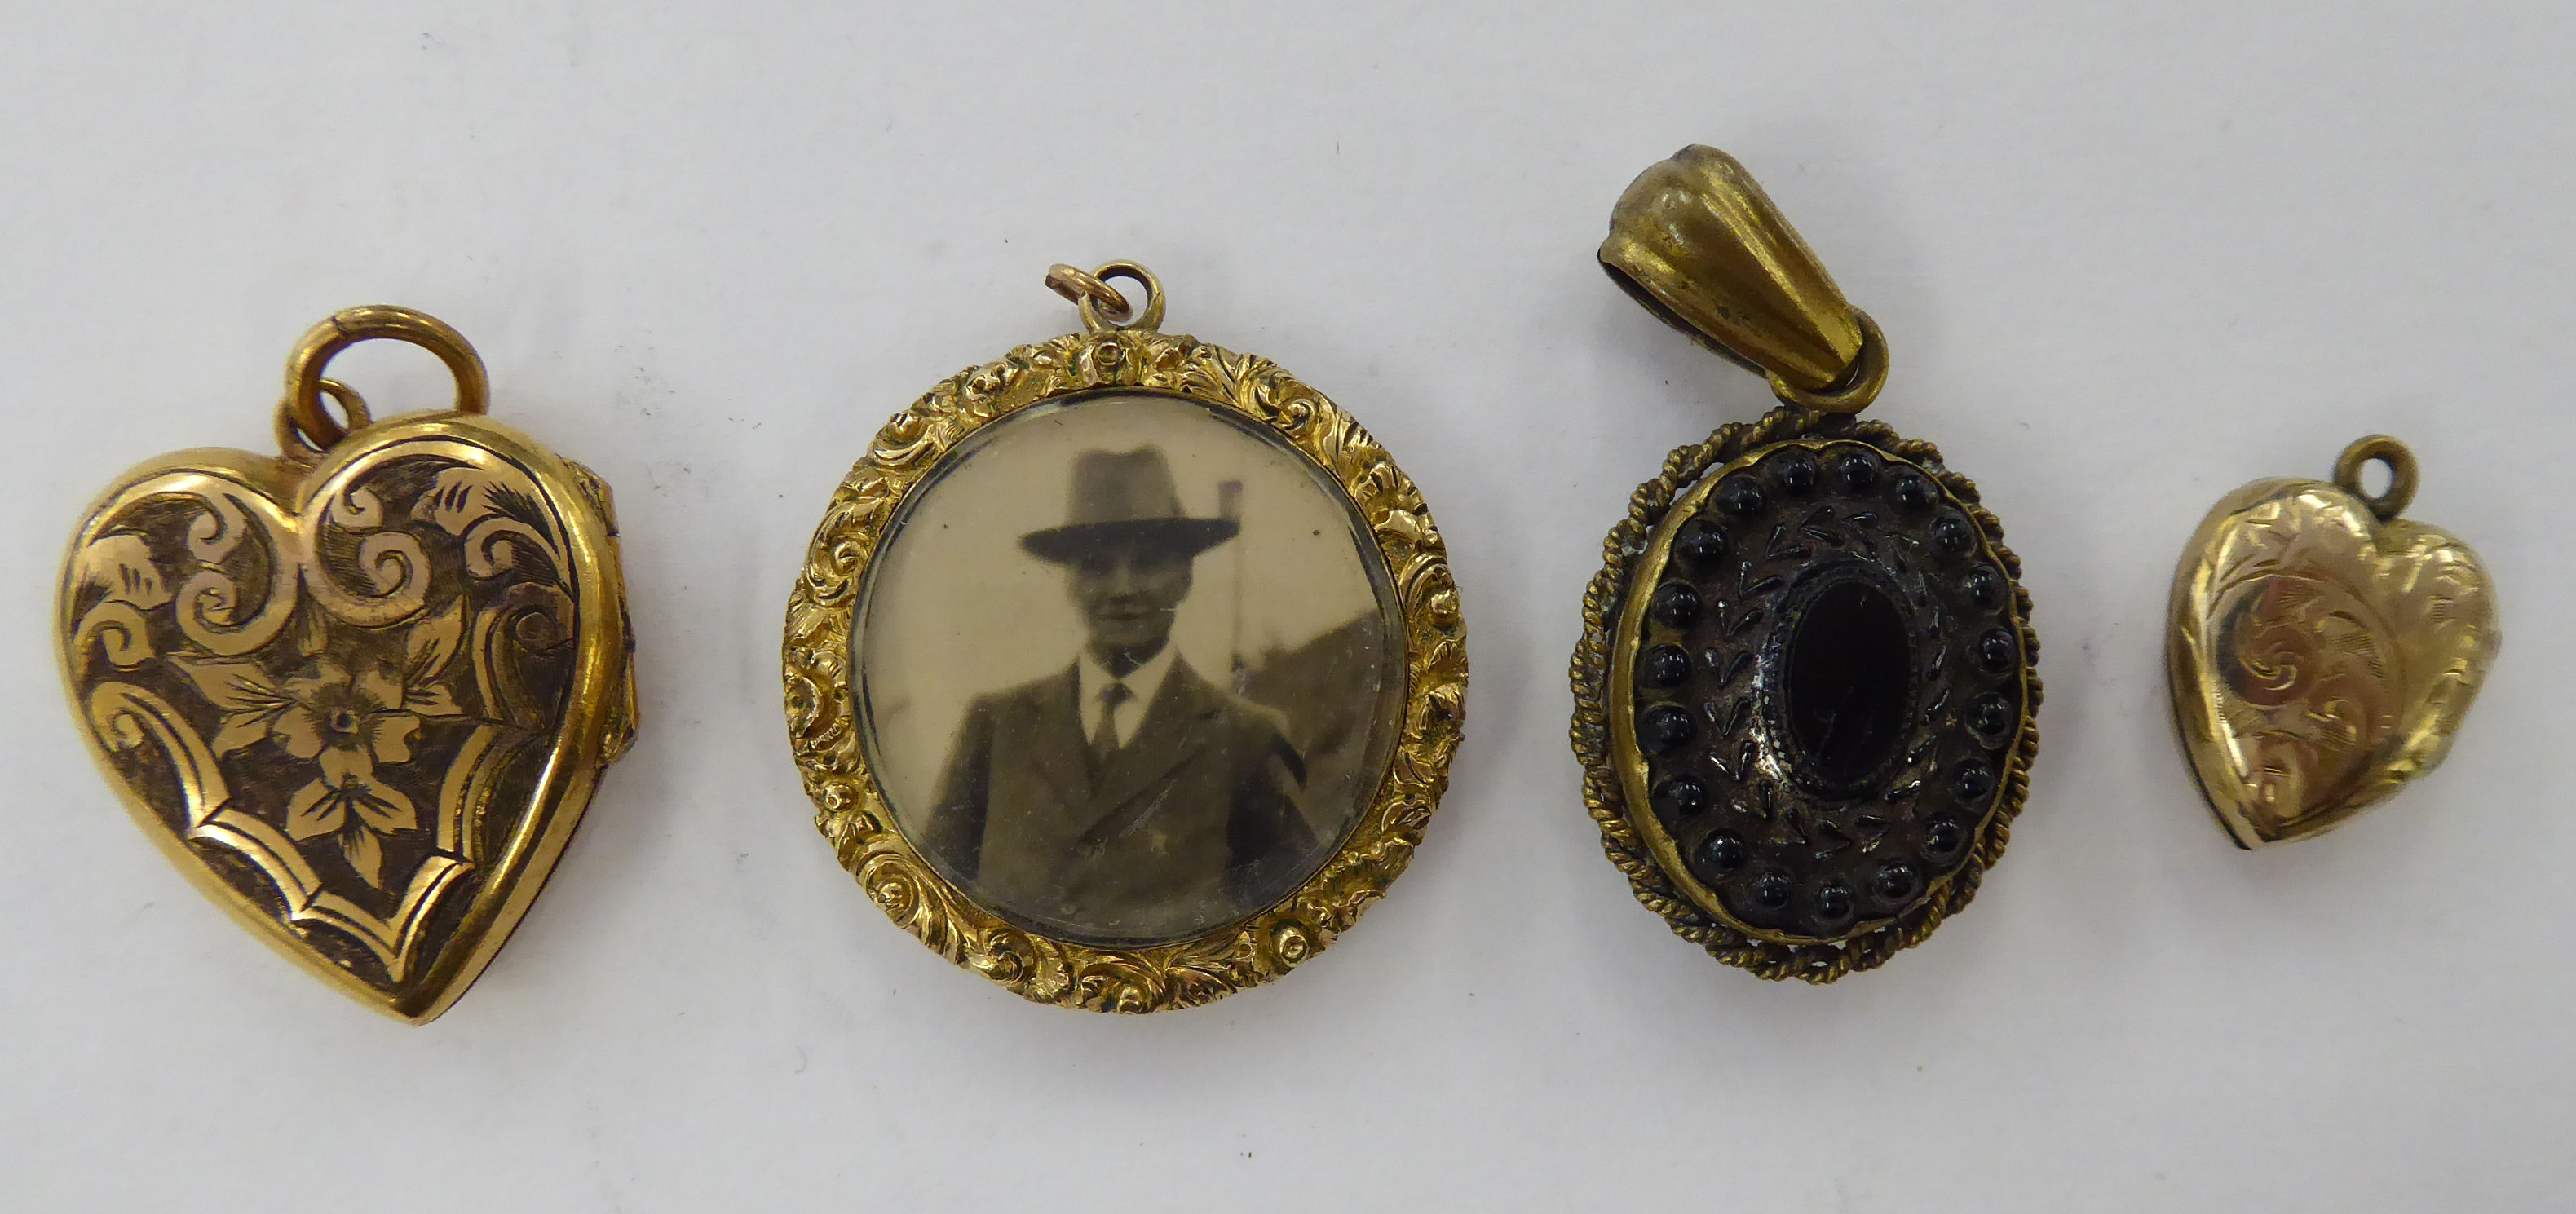 Four dissimilar 'antique' yellow metal lockets: to include one of heart design with floral engraved